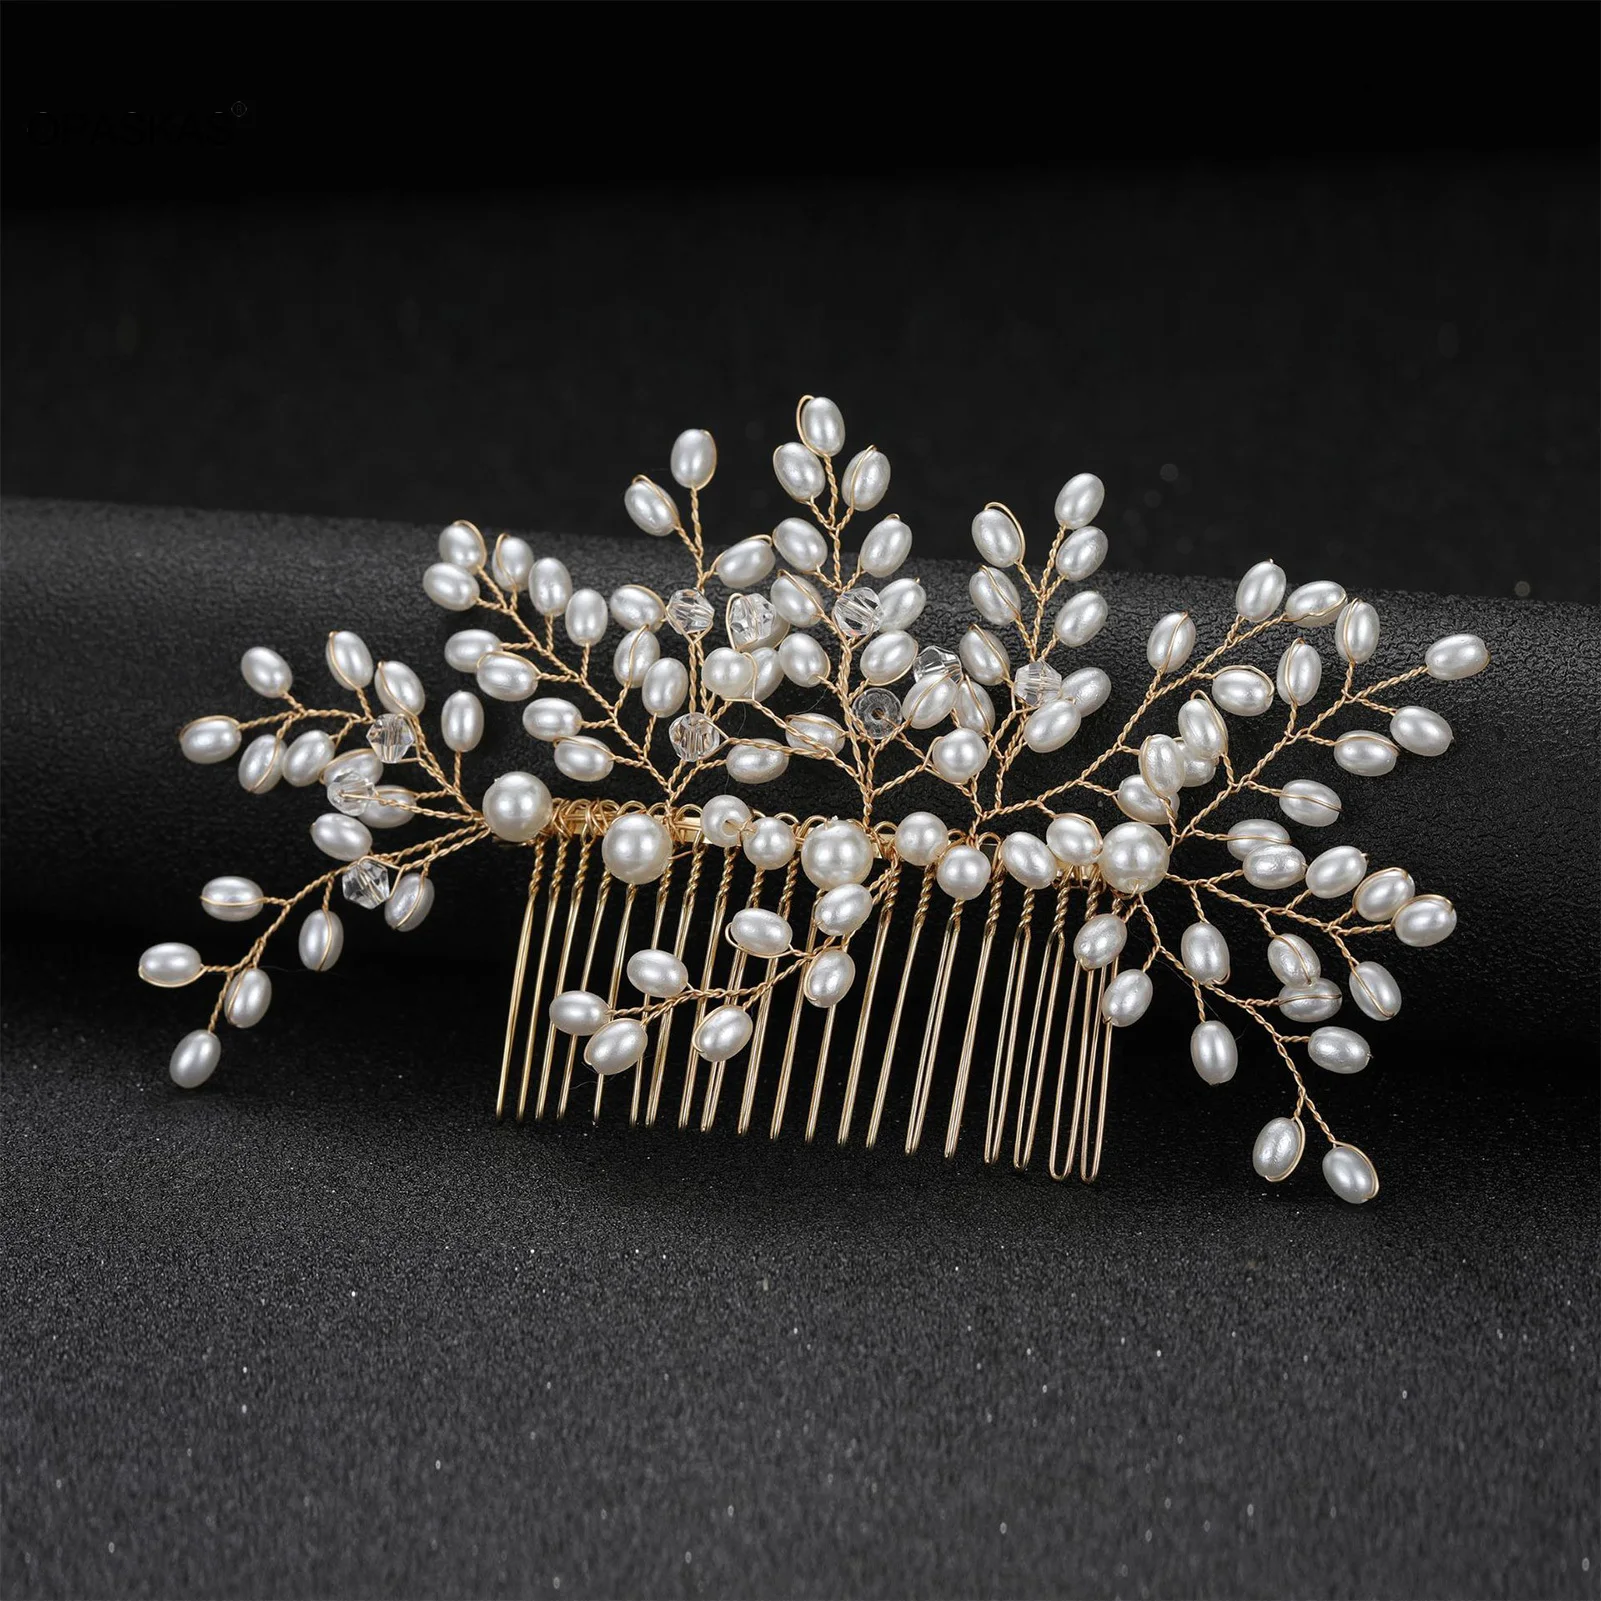 

Bride Hair Side Comb Clips Tiara Sweet Pearls Crystals Hairpin Headpiece Wedding Hair Accessories Headdress Jewelry Girls Crowns